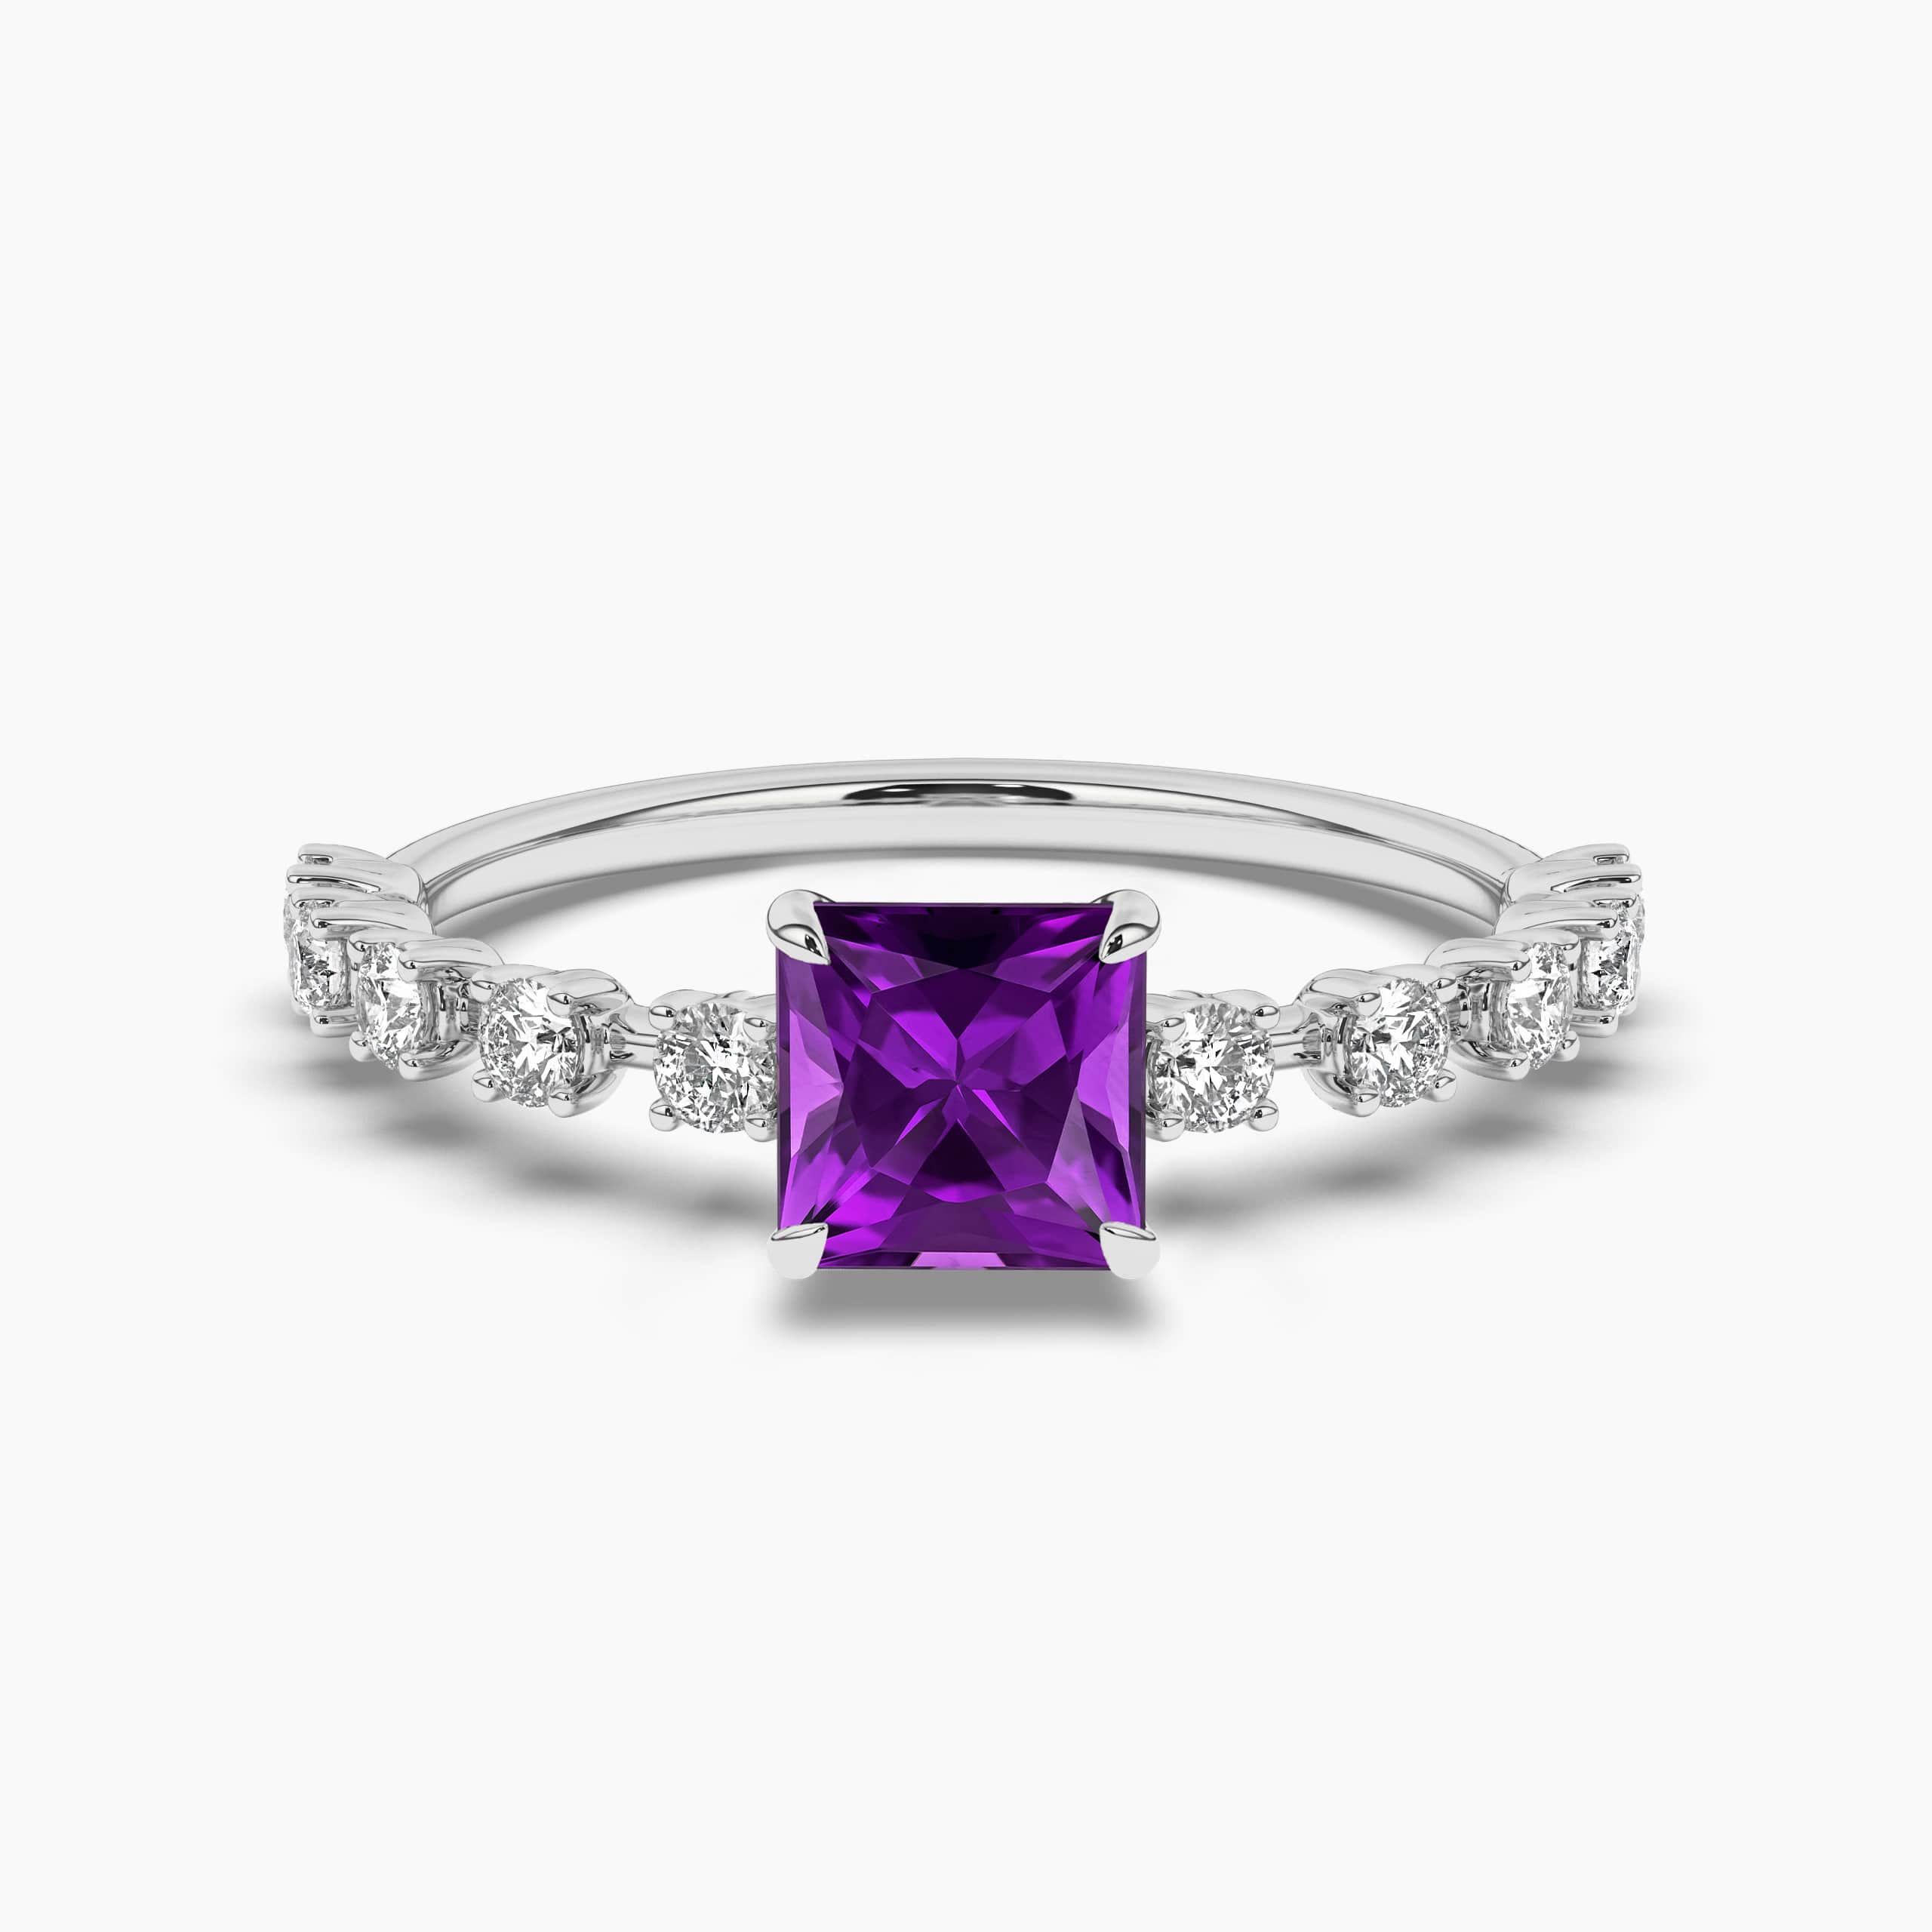 Princess Cut Amethyst and Diamond Ring in white gold